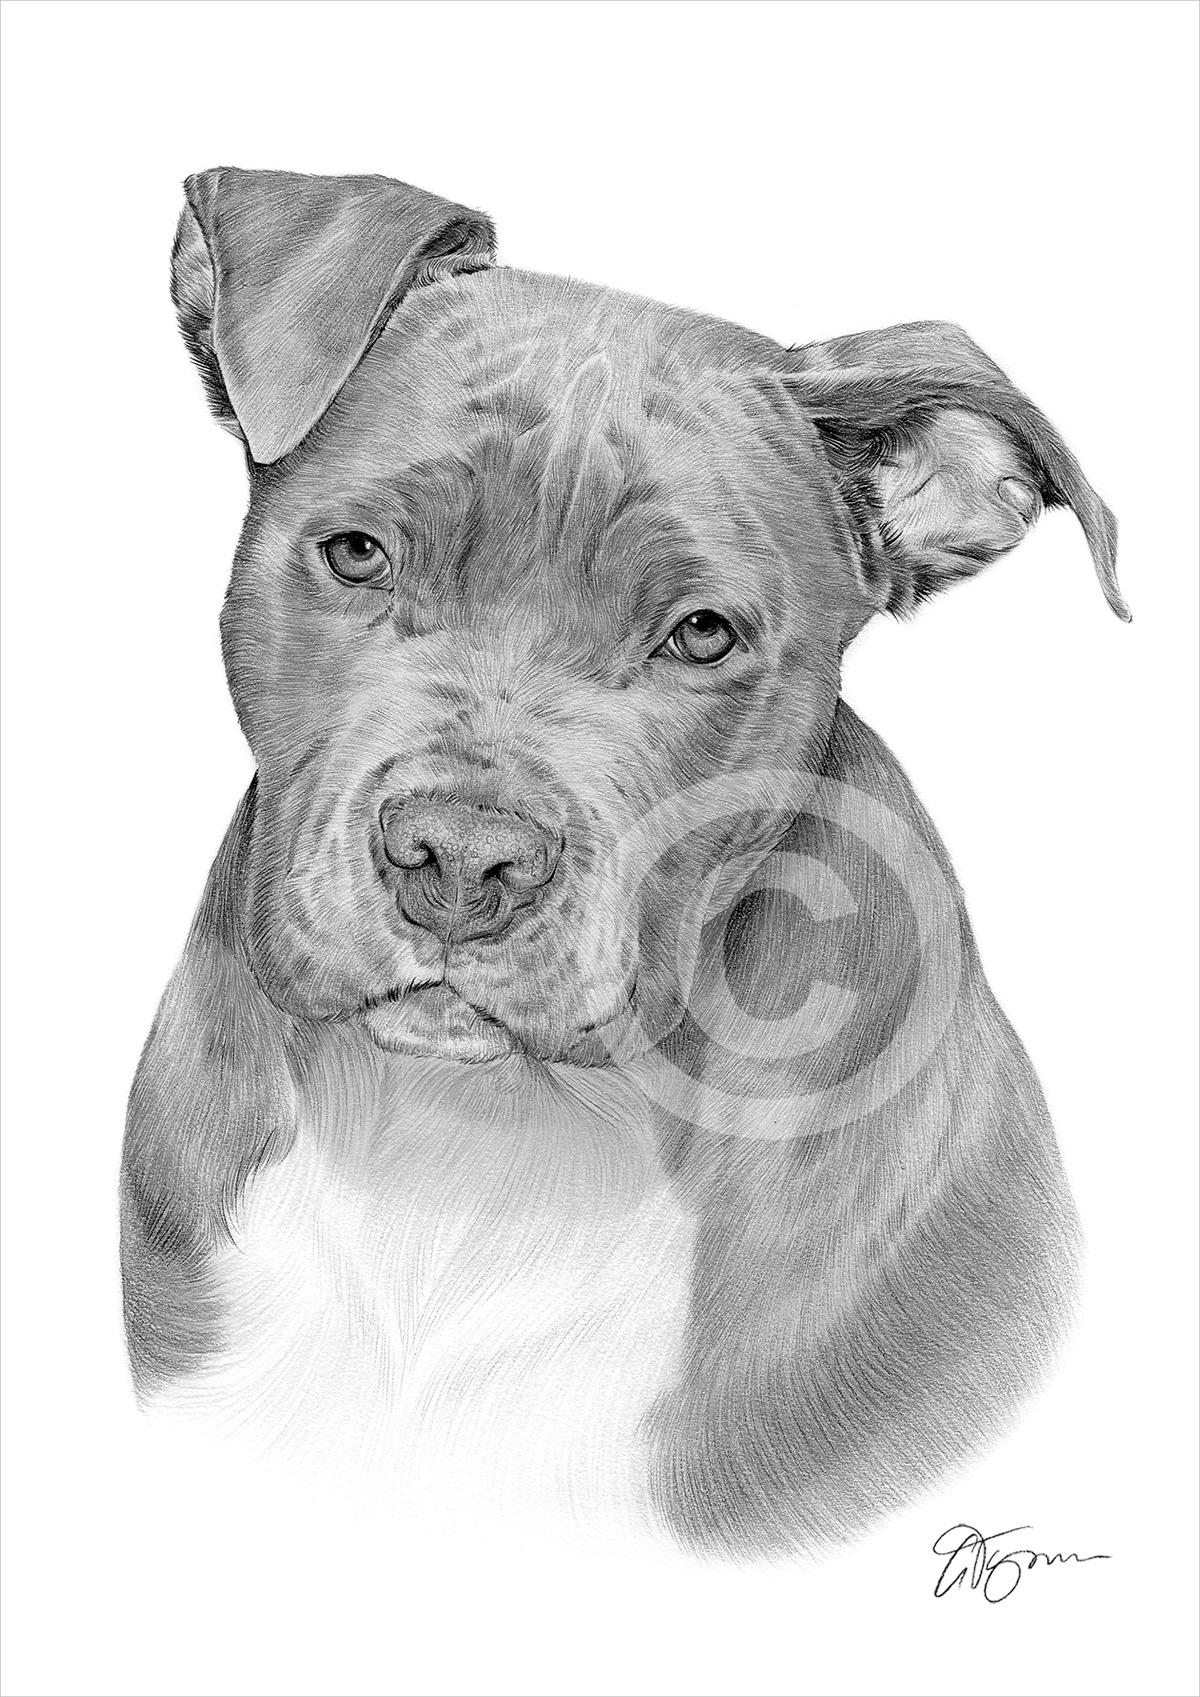 Pencil drawing of a pit bull terrier by artist Gary Tymon